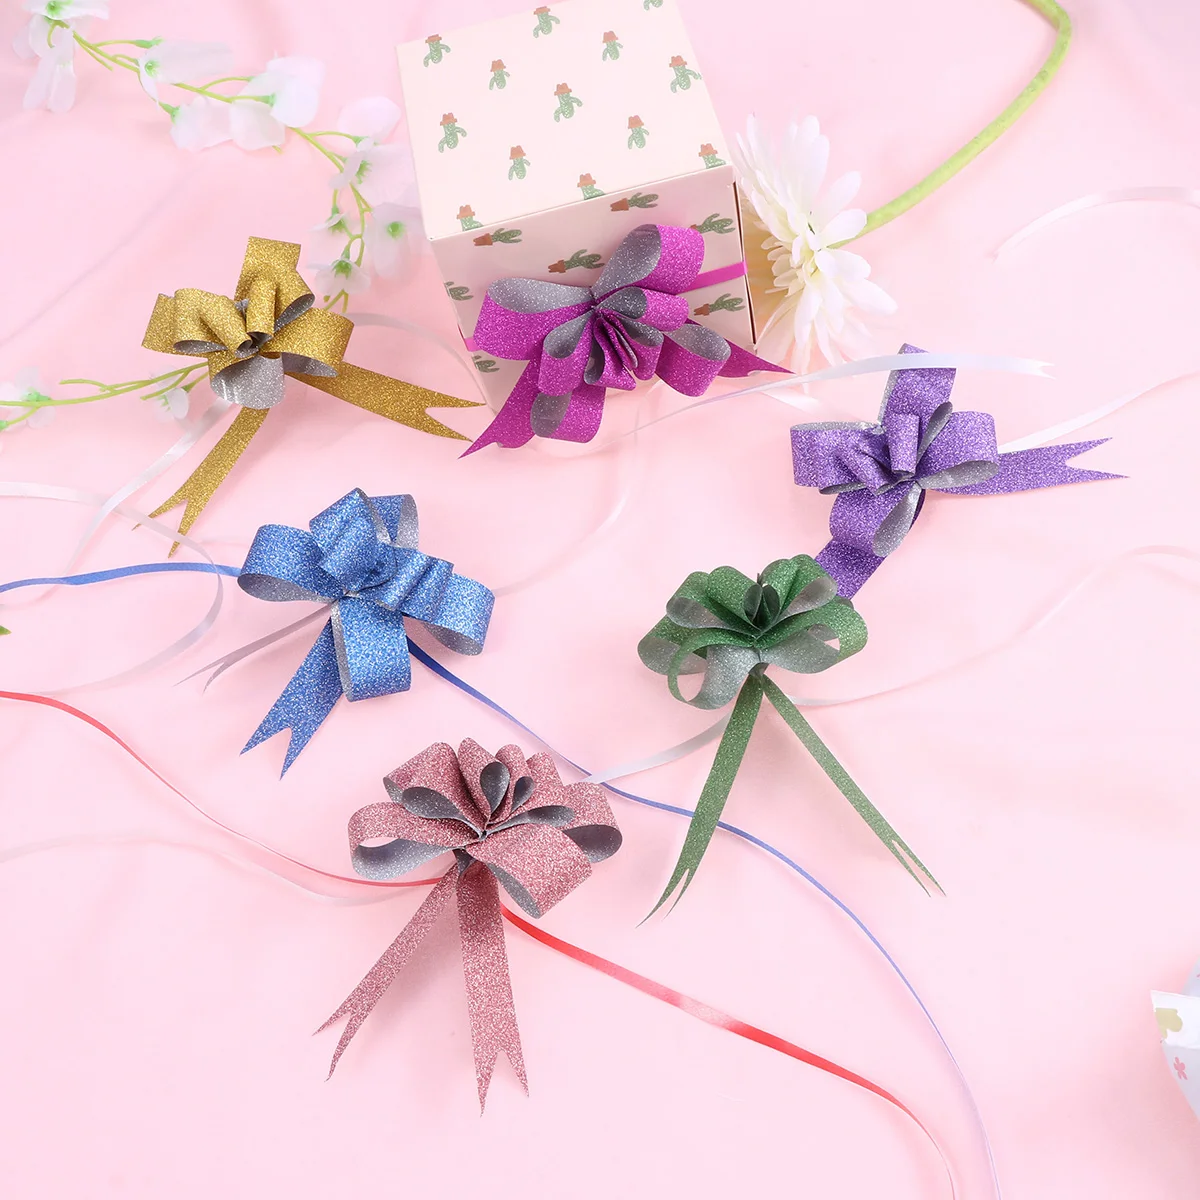 100pcs Pull Bows Gift Knot Ribbons Flower Basket House String Bows for Christmas 